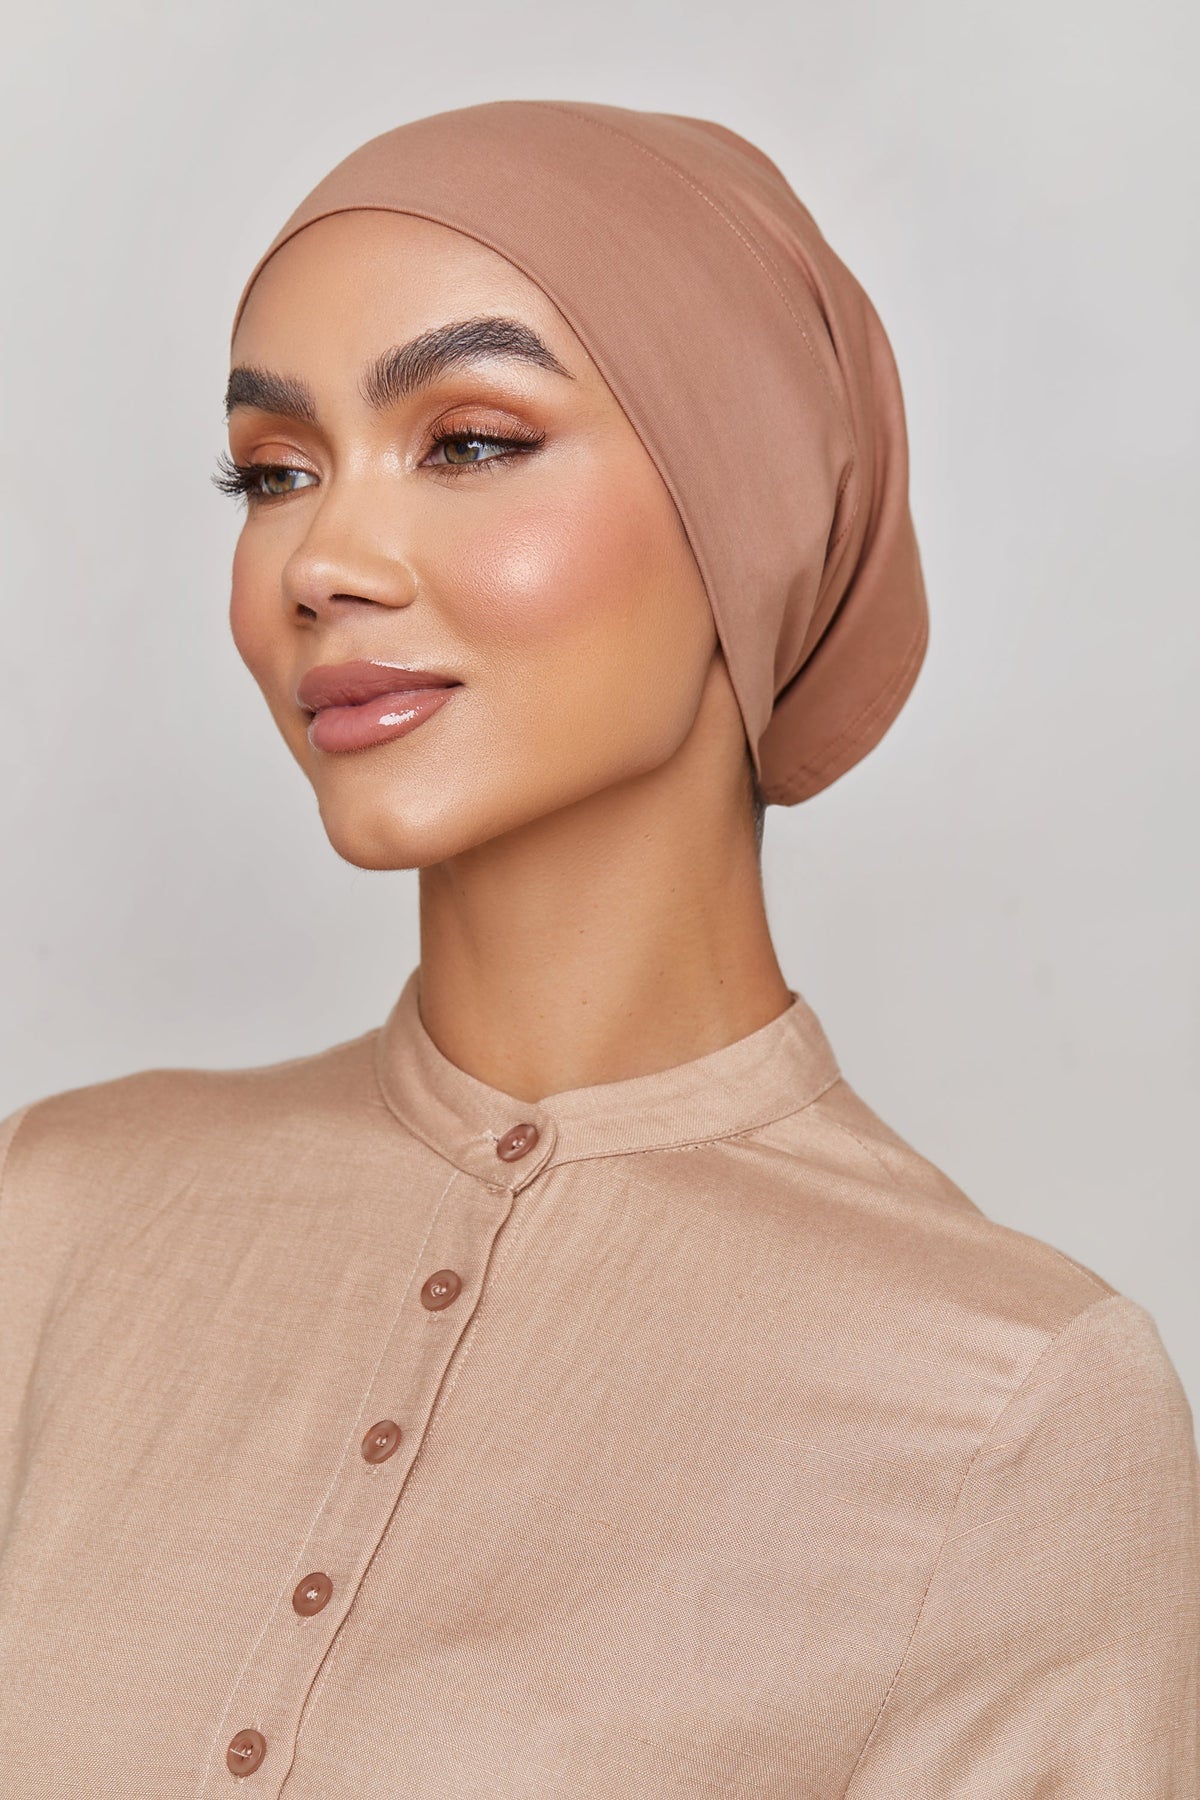 Cotton Undercap - Ginger Snap Veiled Collection 